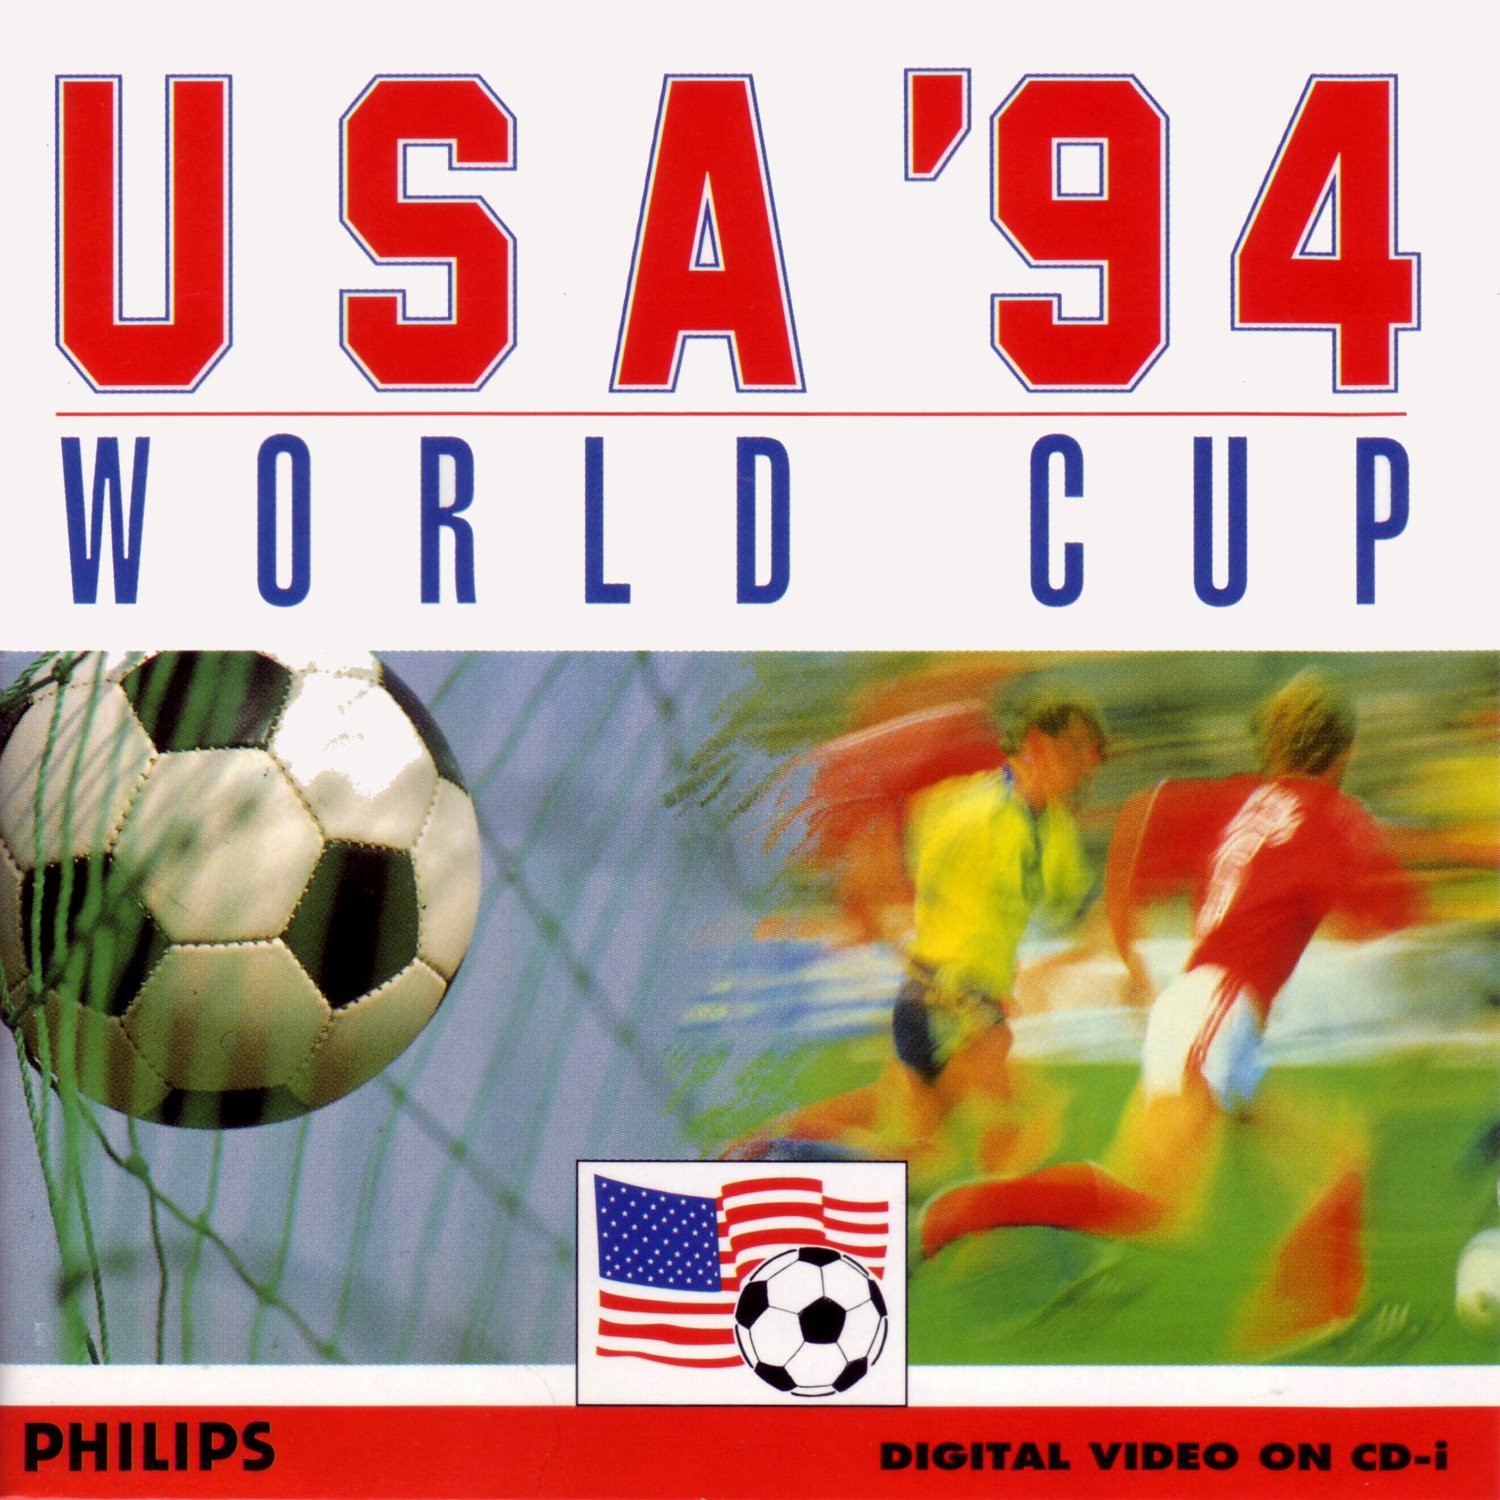 USA ’94 World Cup - The World of CD-i